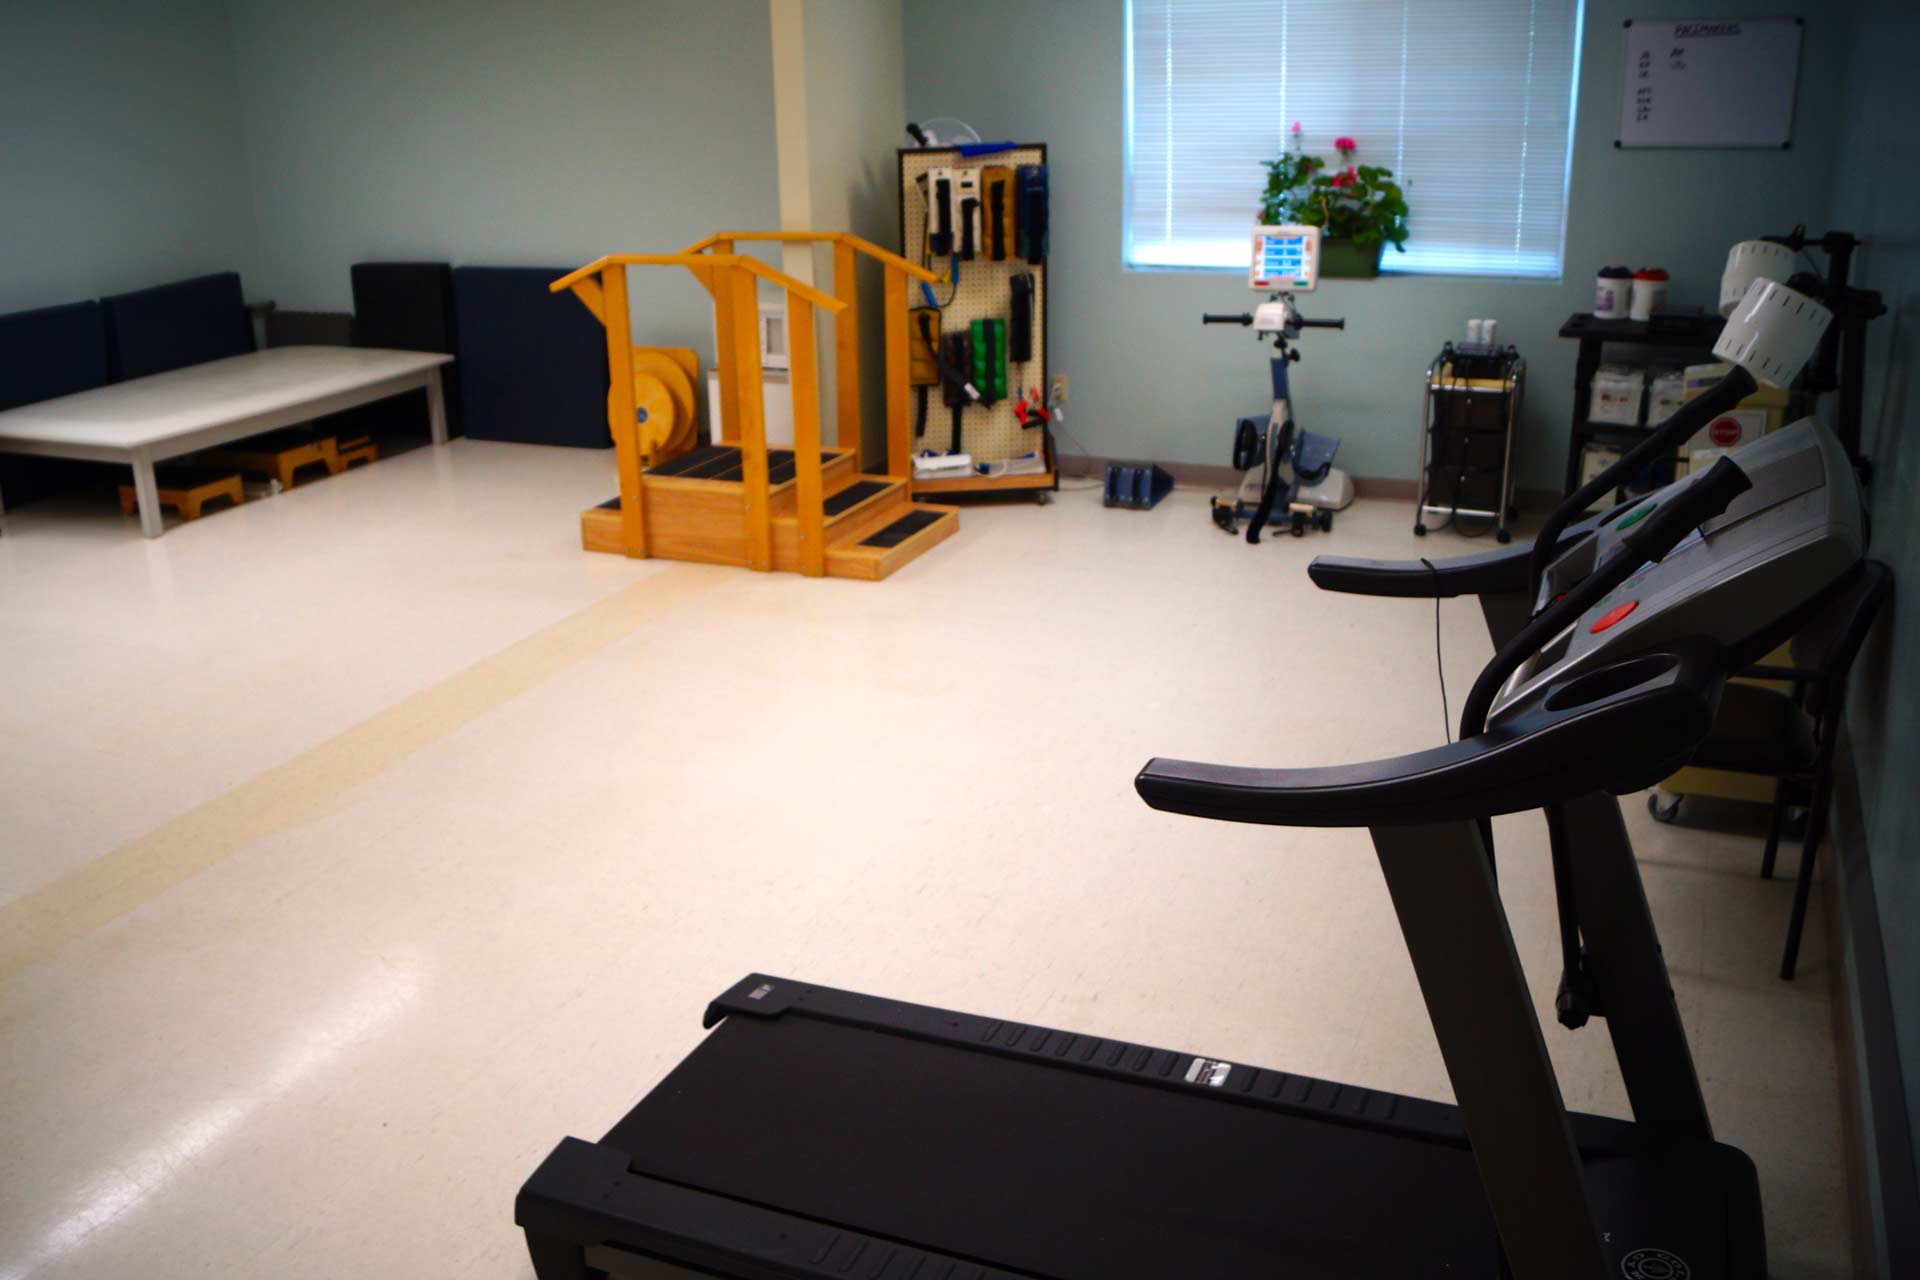 Our Therapy Gym